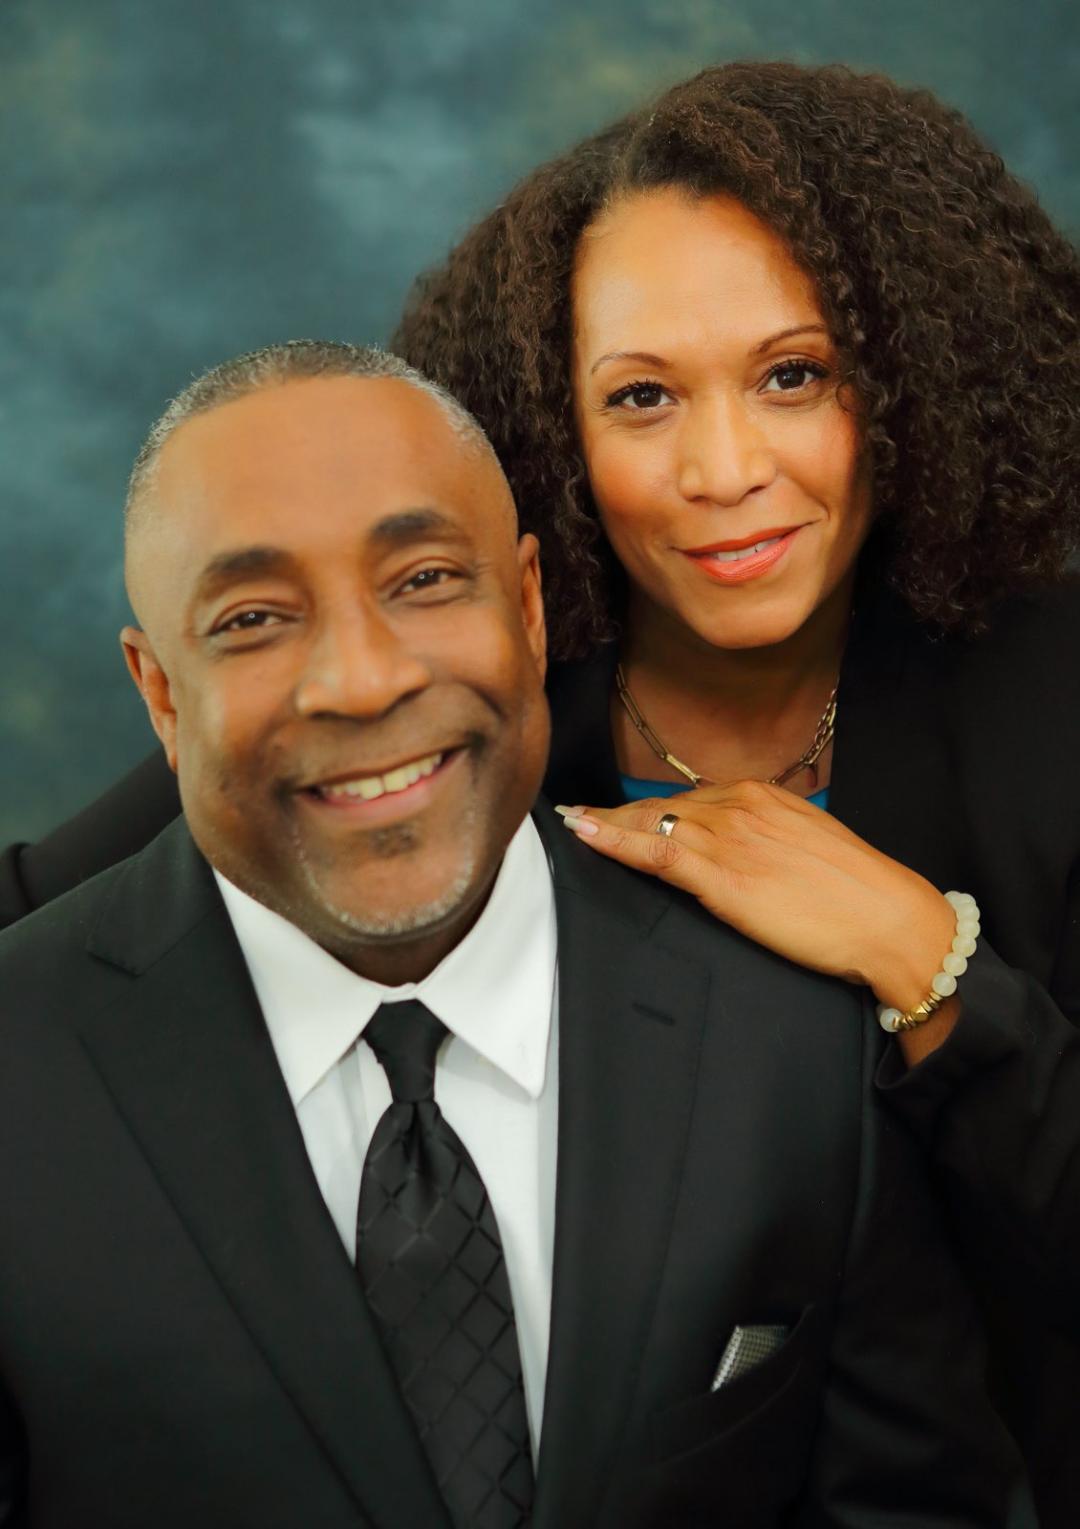 Pastor and First Lady photograph